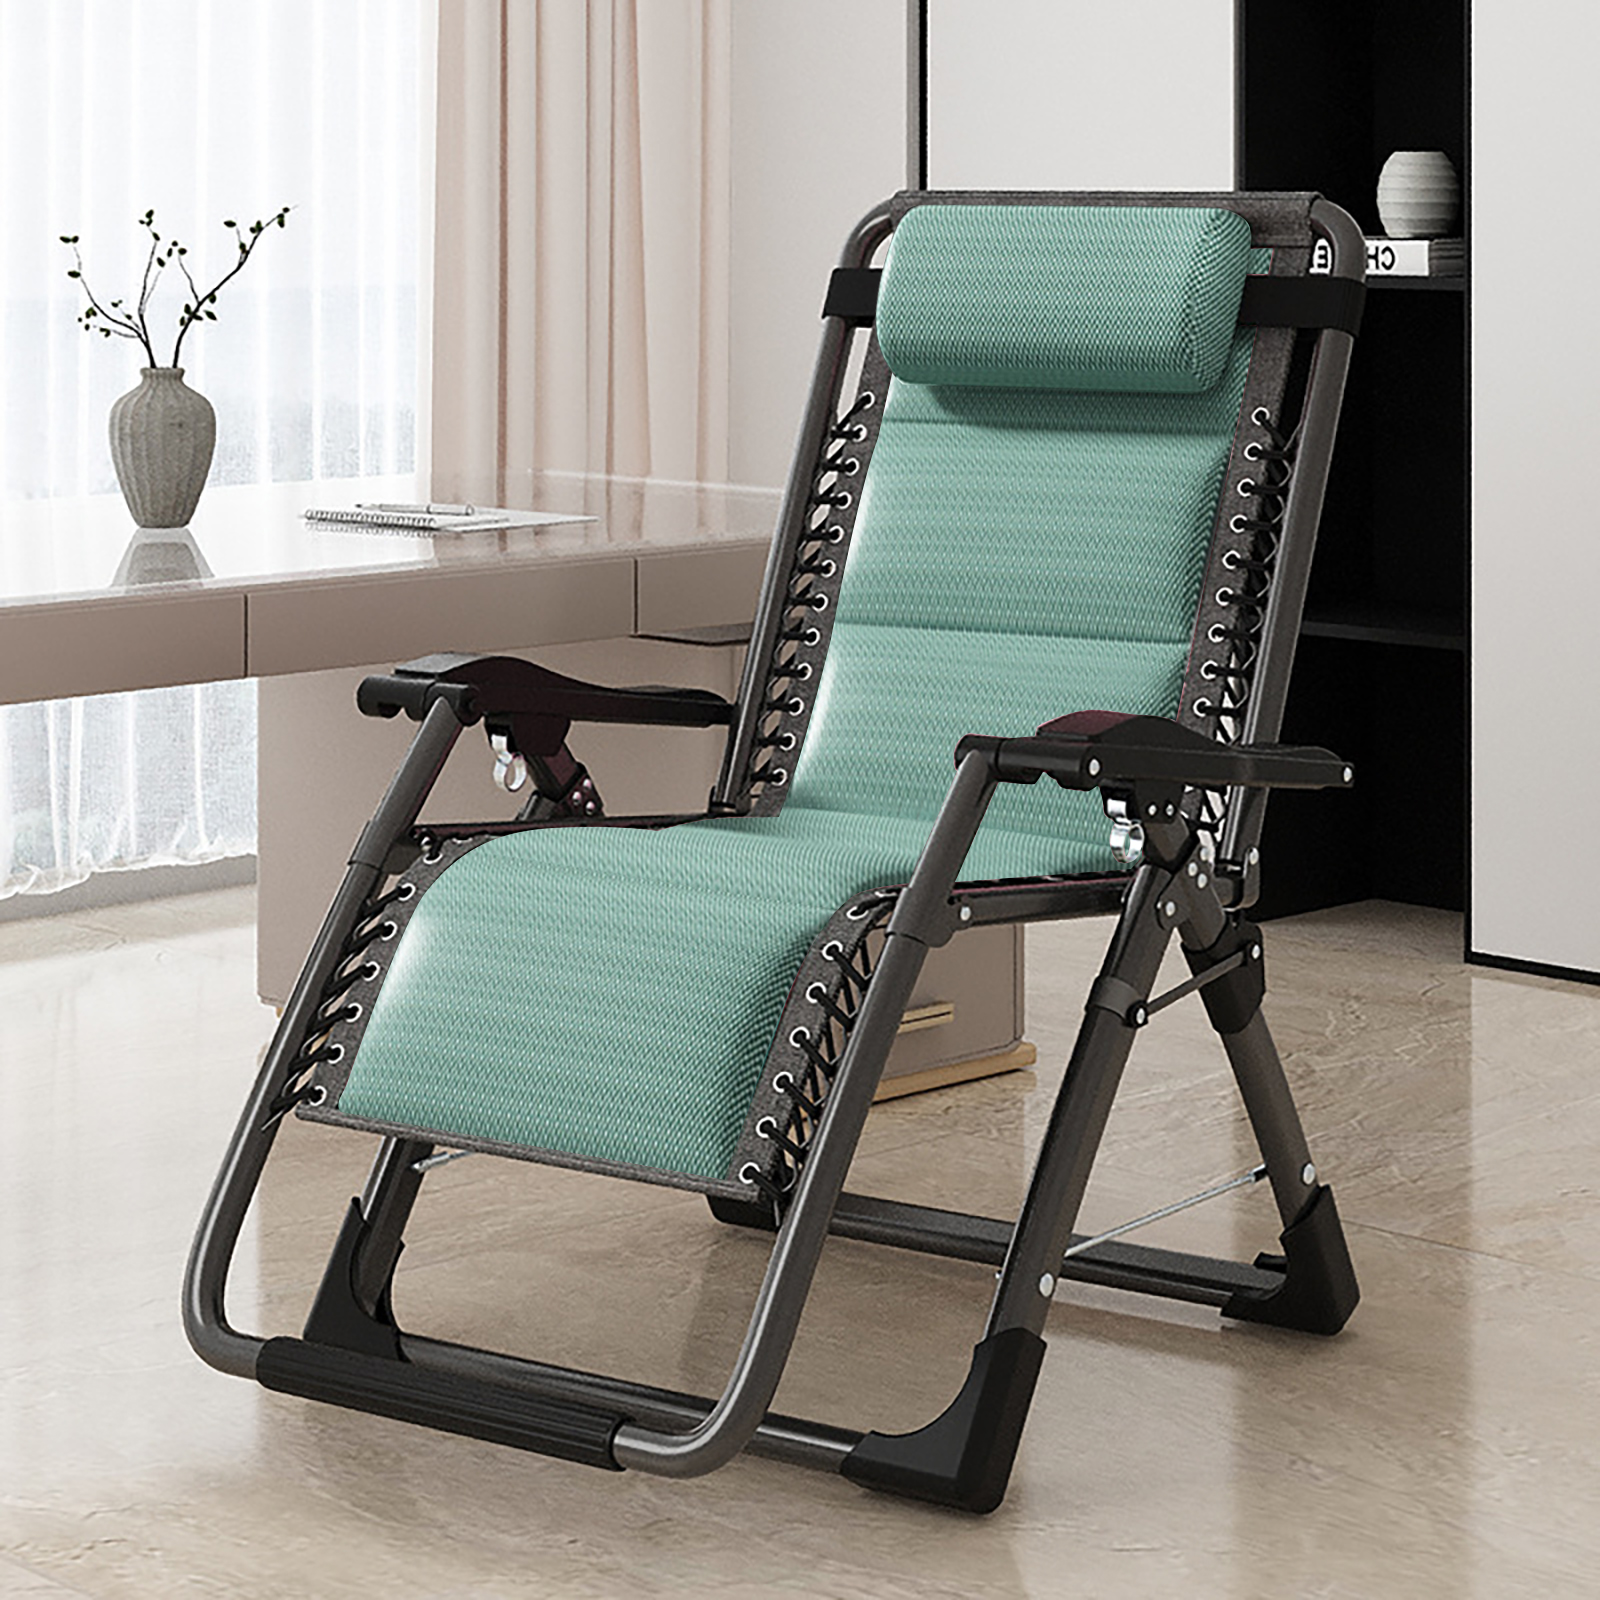 Lilypelle Zero Gravity Chair Folding Reclining Lounge Chair with Mat Lounge Recliner Chairs with Tray,Pillow - image 5 of 7